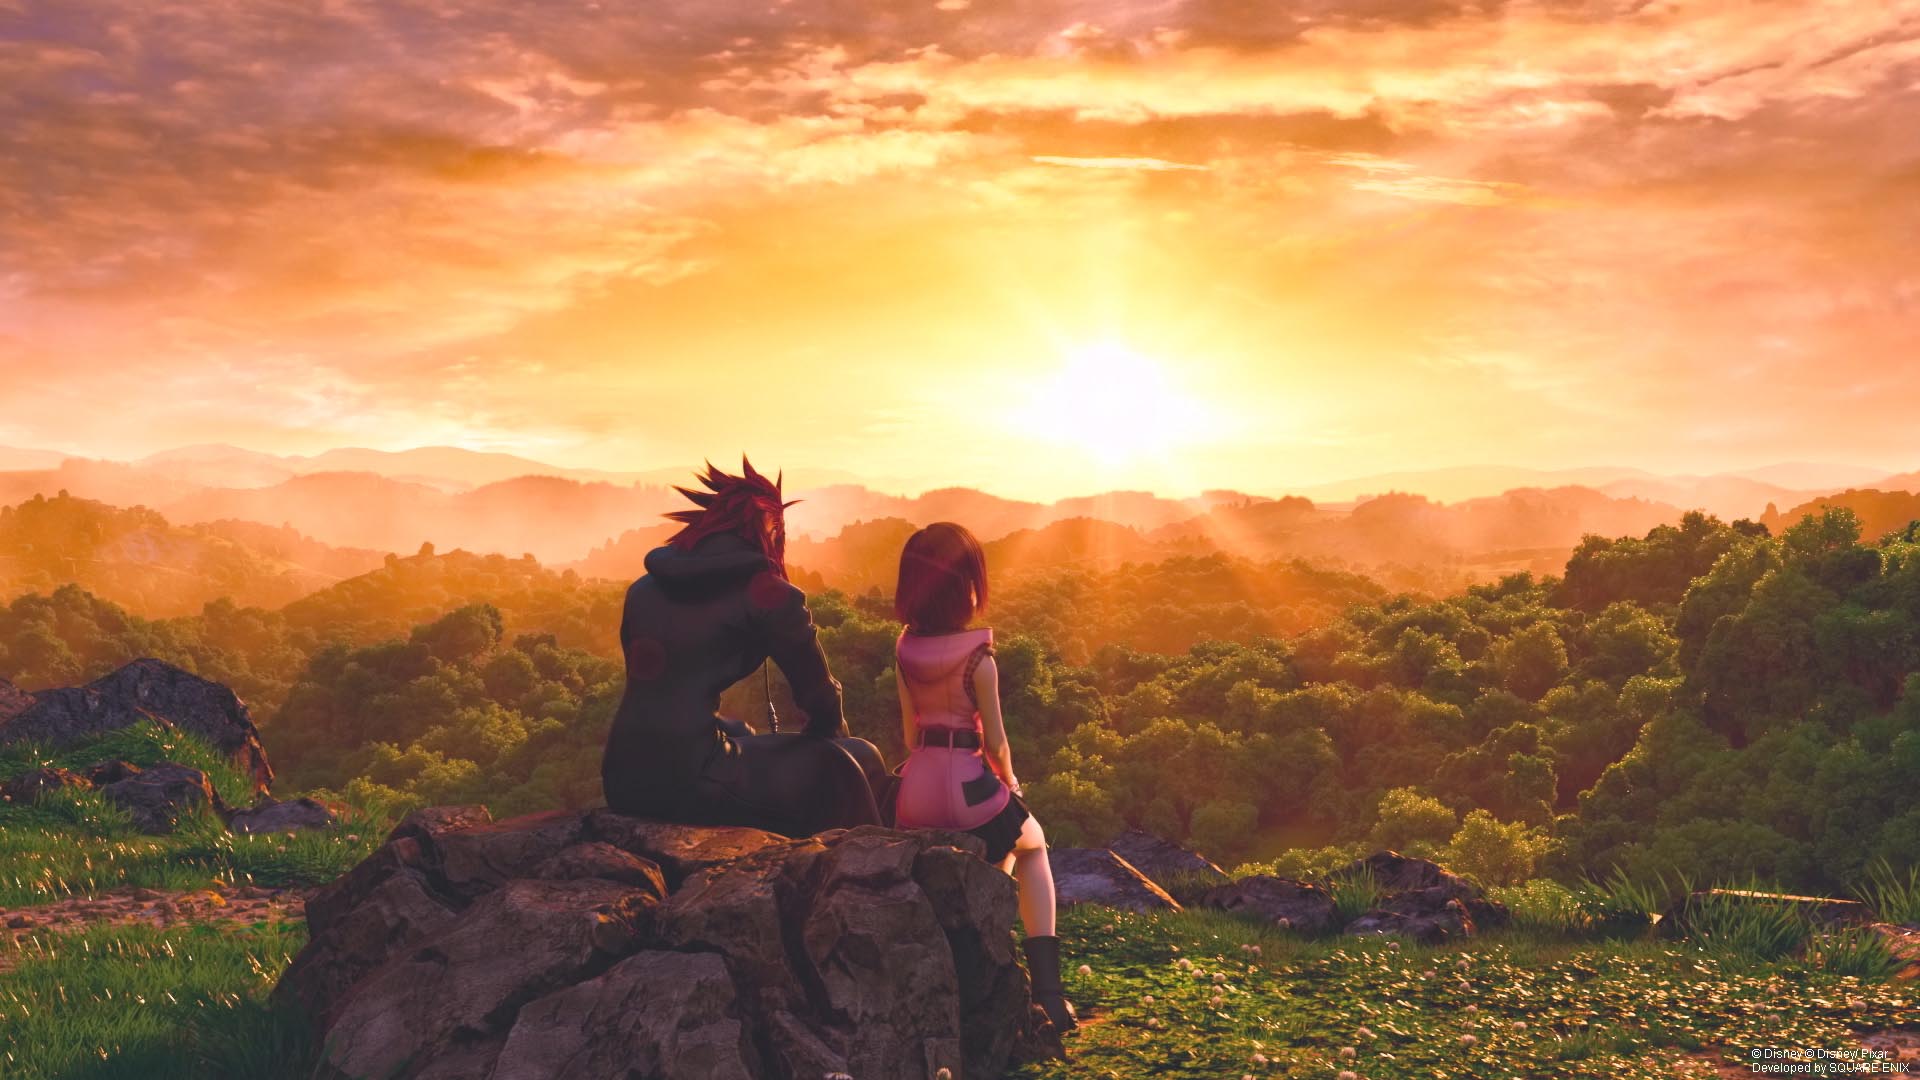 A sunset in Kingdom Hearts, with a soundtrack composed by Yoko Shimomura